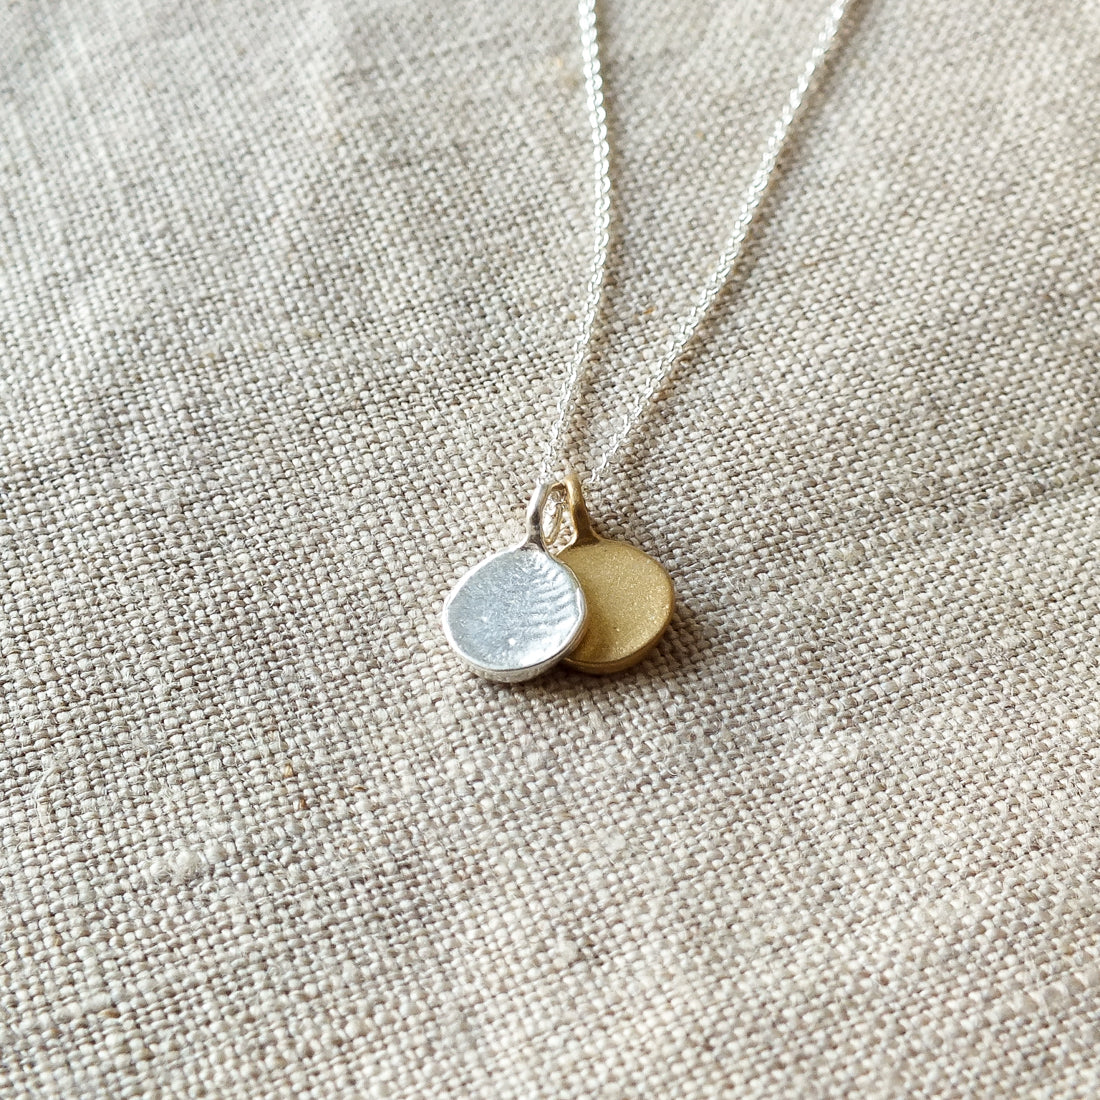 A Count My Blessings Necklace by Becoming Jewelry with two round silver &amp; gold vermeil charms on a linen background.